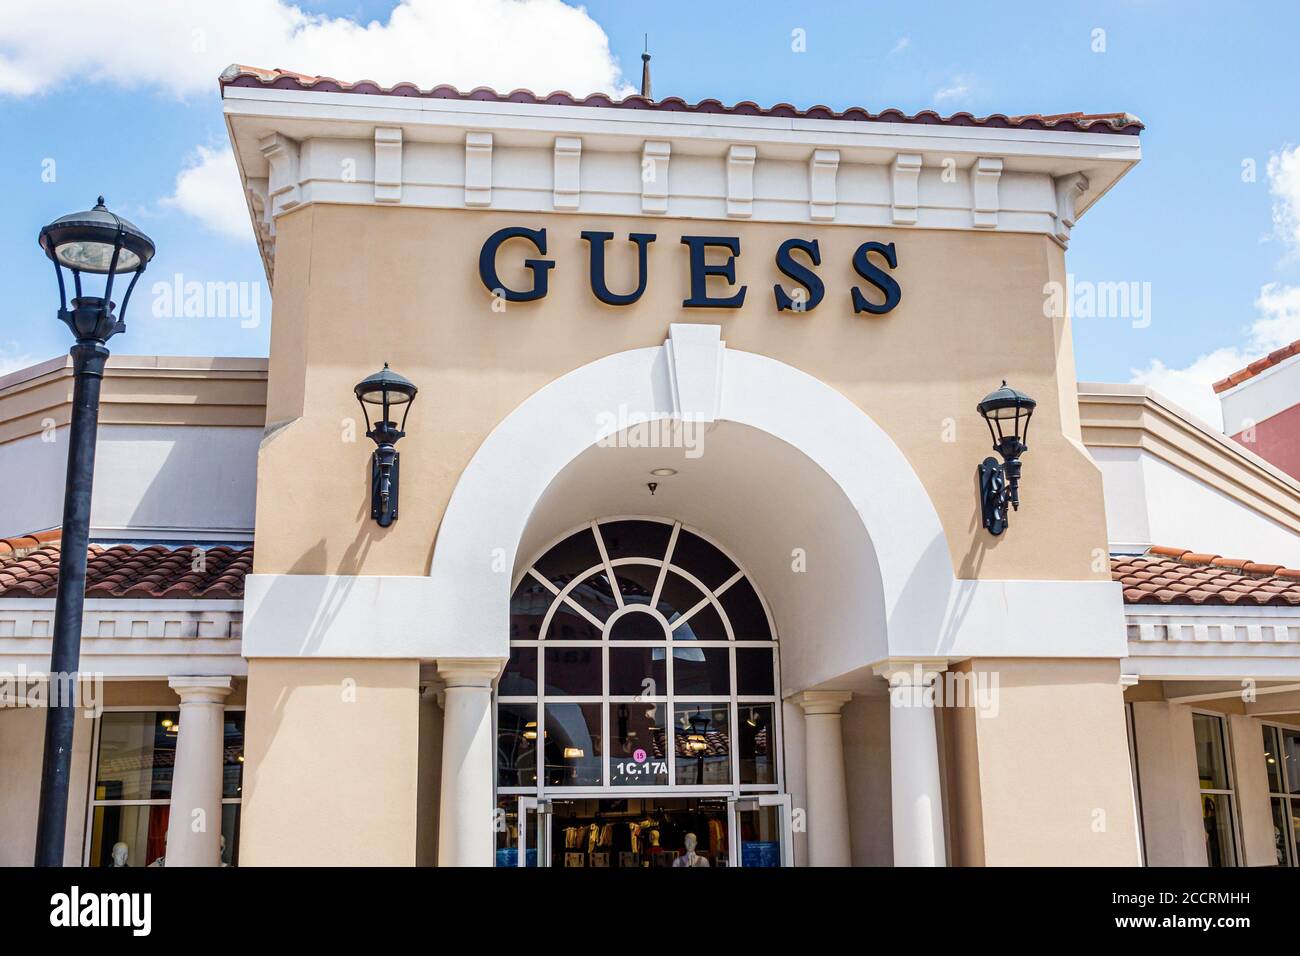 Guess Stores High Resolution Stock Photography and Images - Alamy